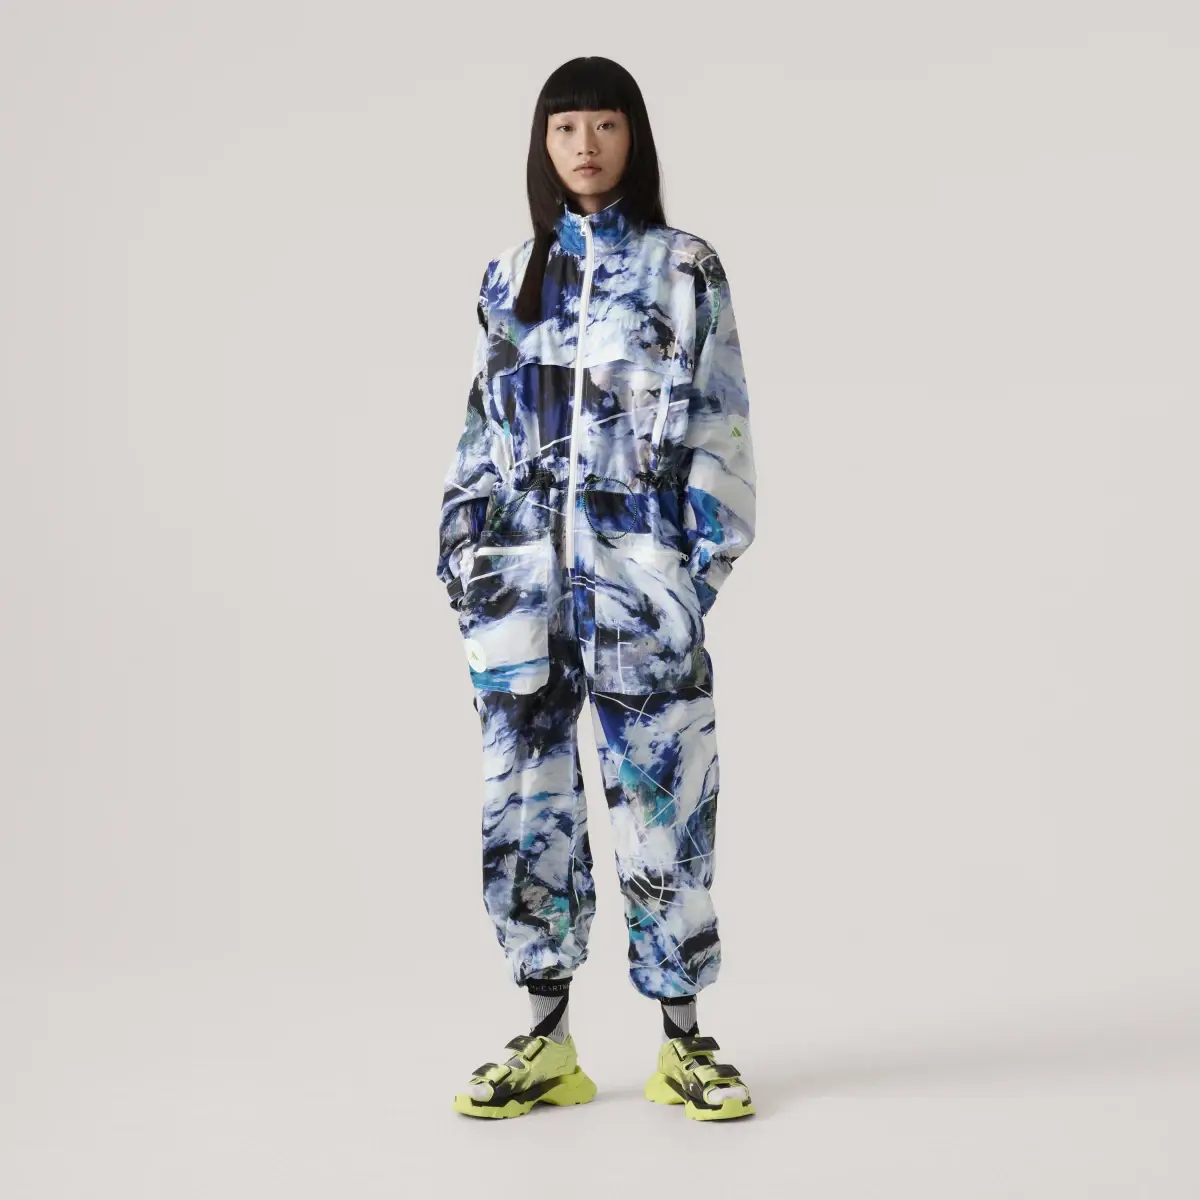 Adidas by Stella McCartney TrueCasuals All-in-One Overall. 1